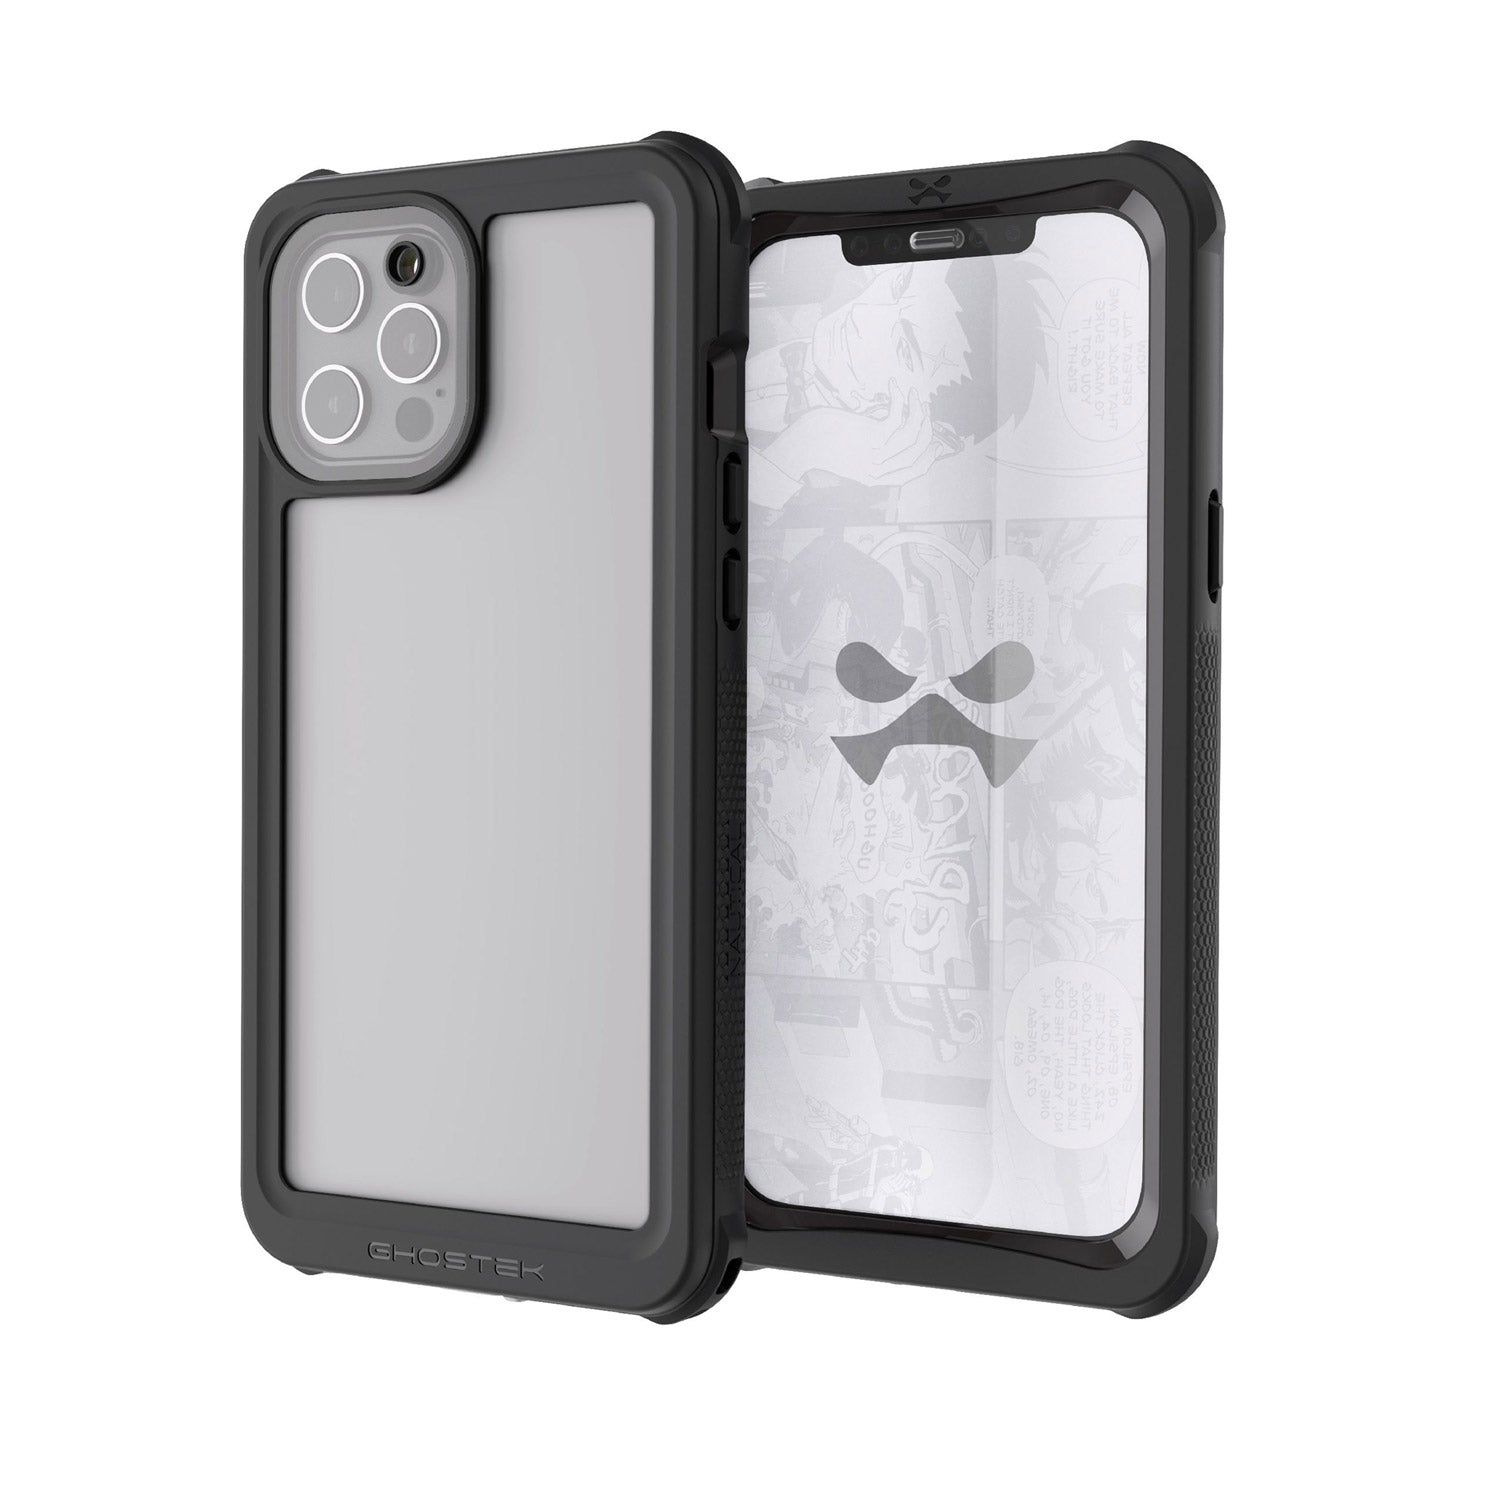 Ghostek iPhone 12 Pro Max Case Nautical 3 Extreme Waterproof Clear